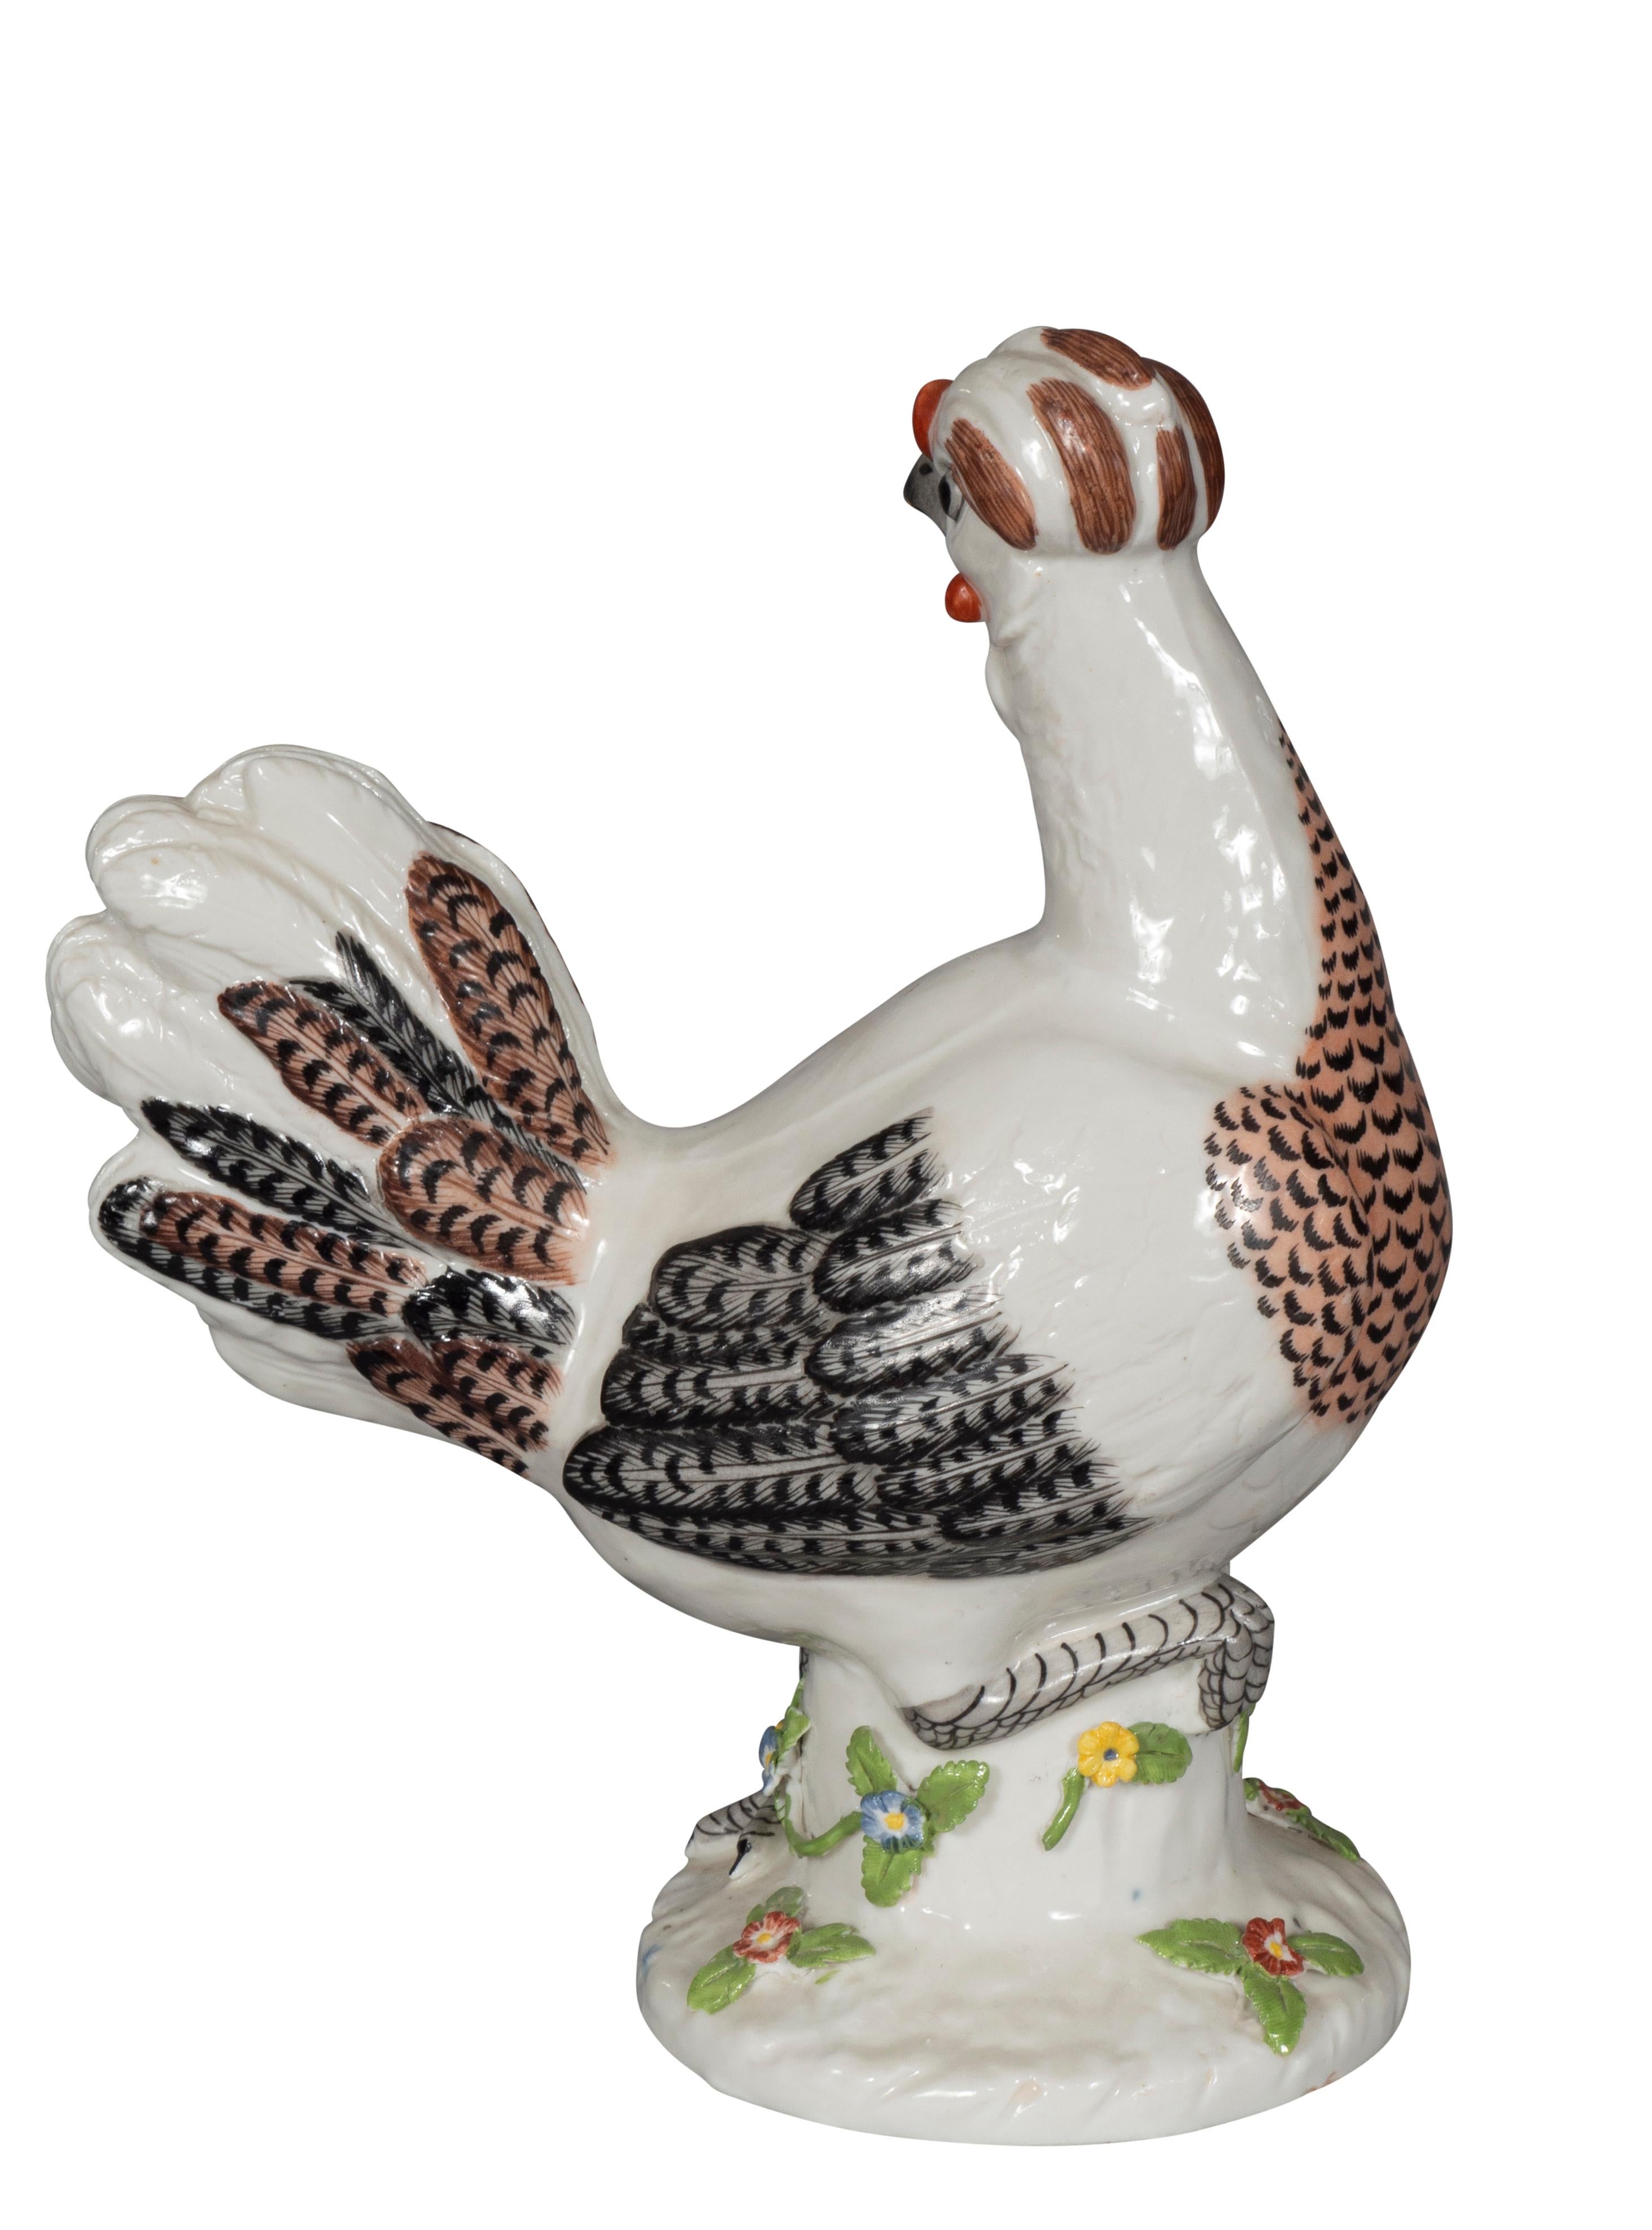 Pair of European Porcelain Roosters For Sale 10